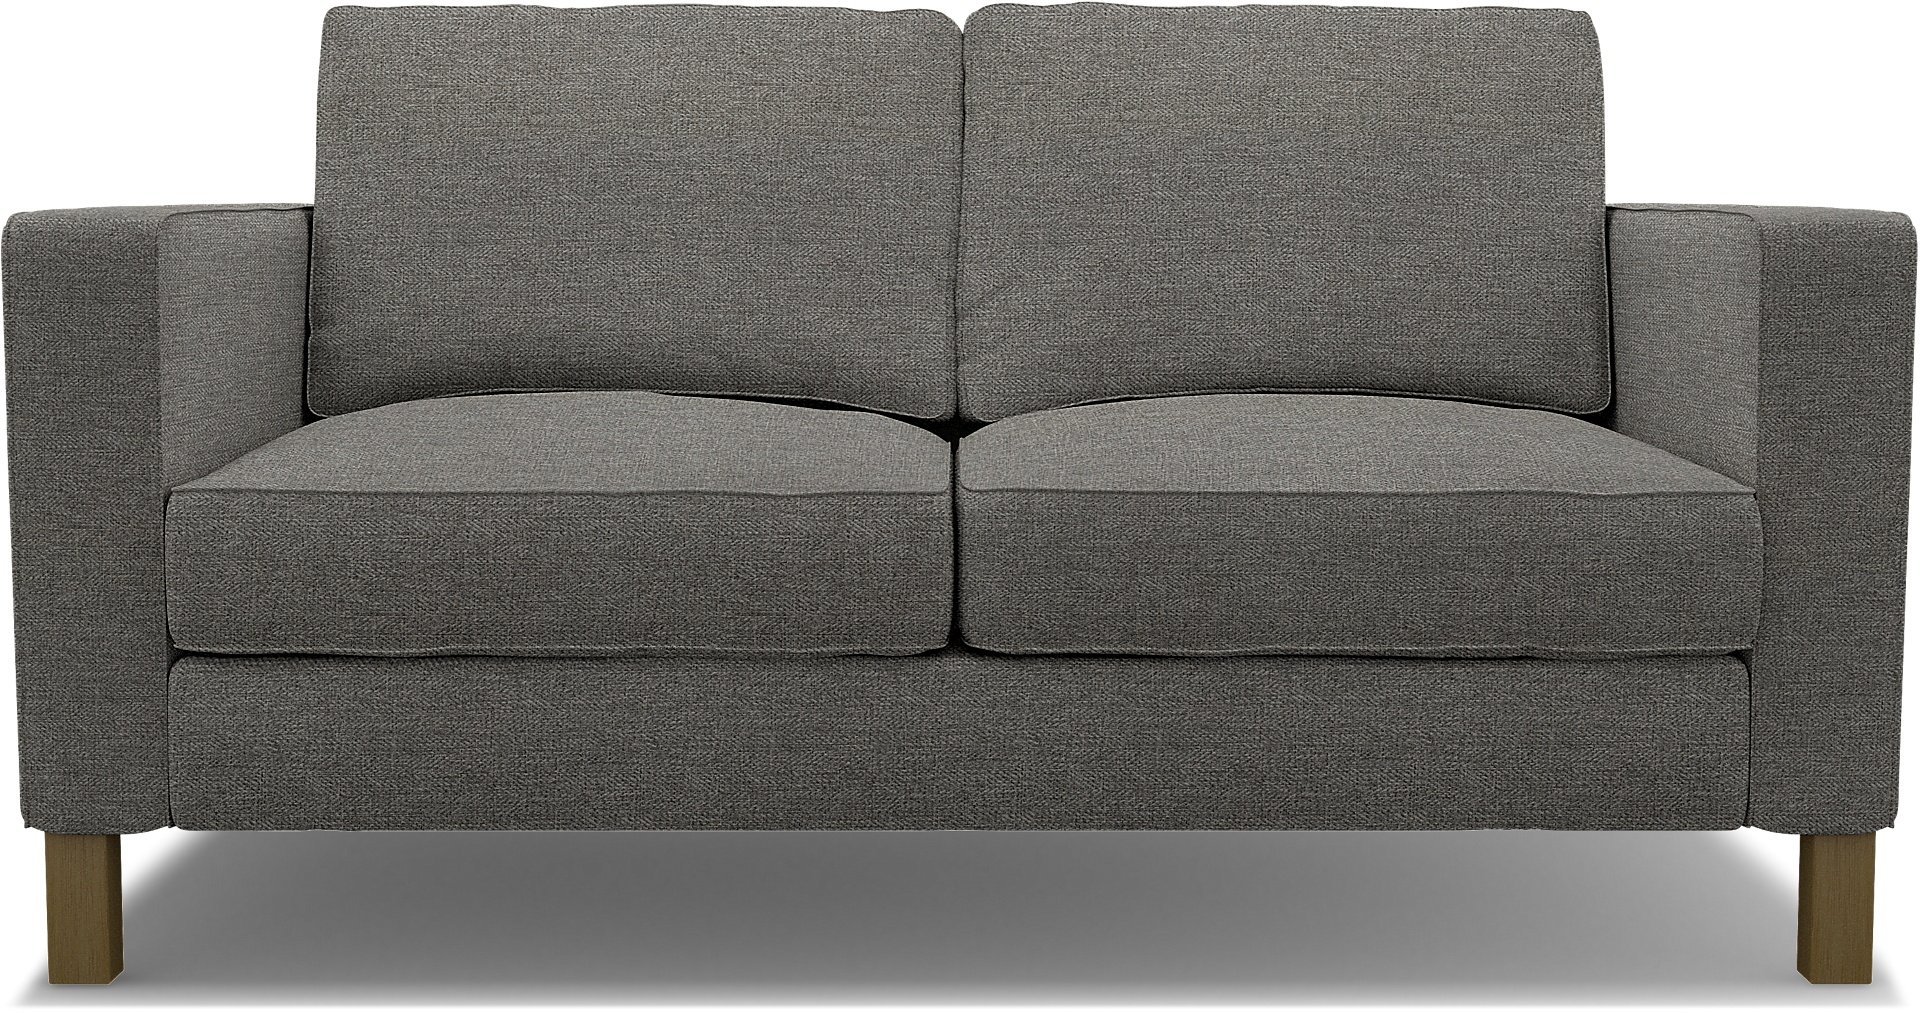 IKEA - Karlstad 2 Seater Sofa Cover, Taupe, Boucle & Texture - Bemz